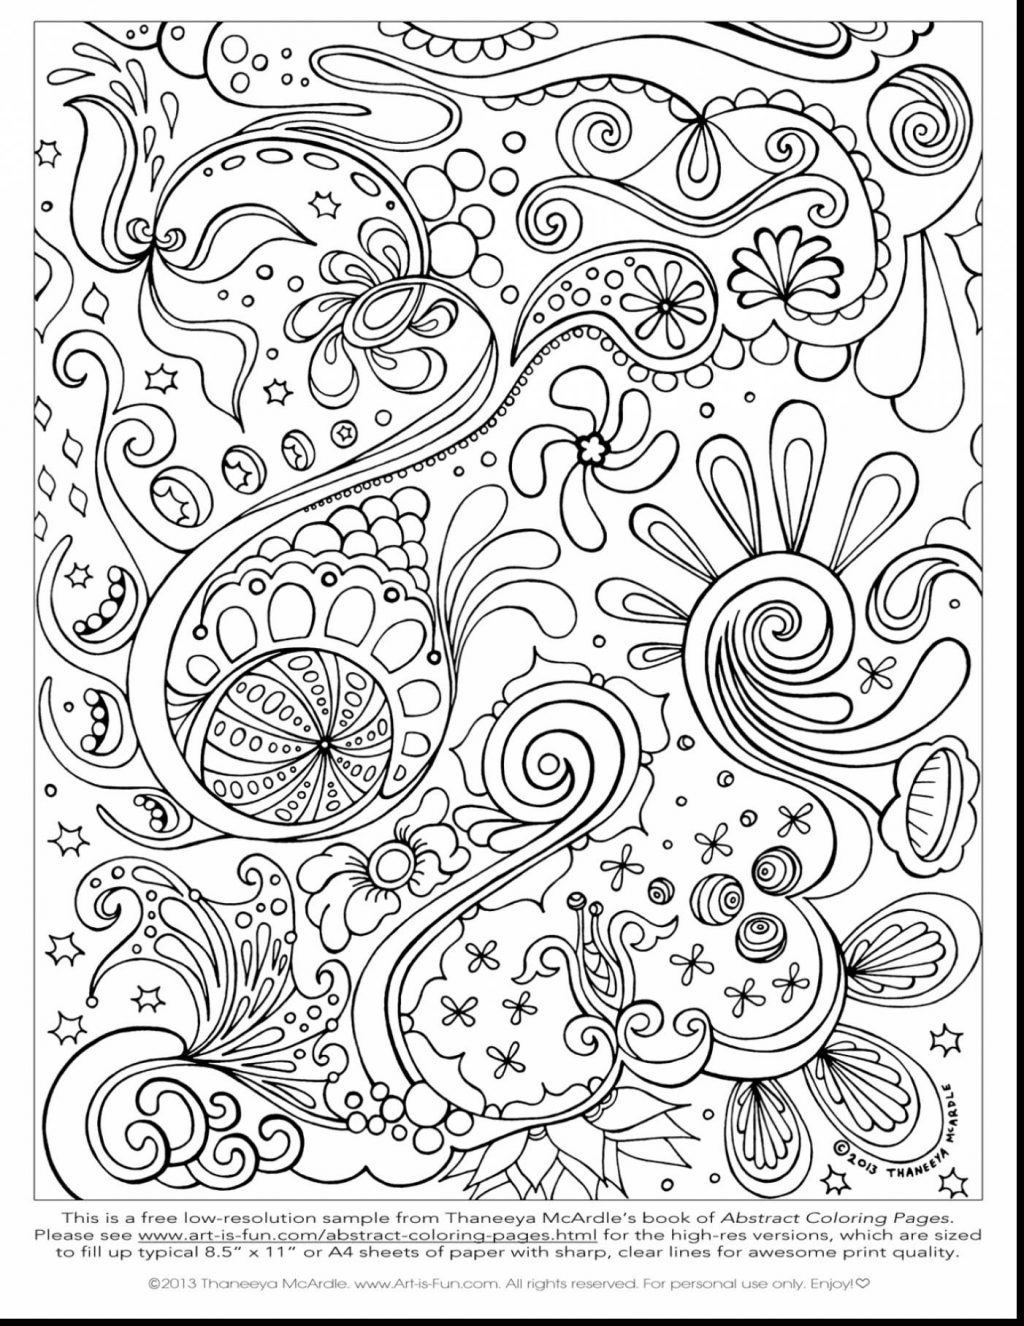 Coloring Page: Extraordinary Free Printable Coloring Pages For - Free Printable Coloring Pages For Adults Pdf